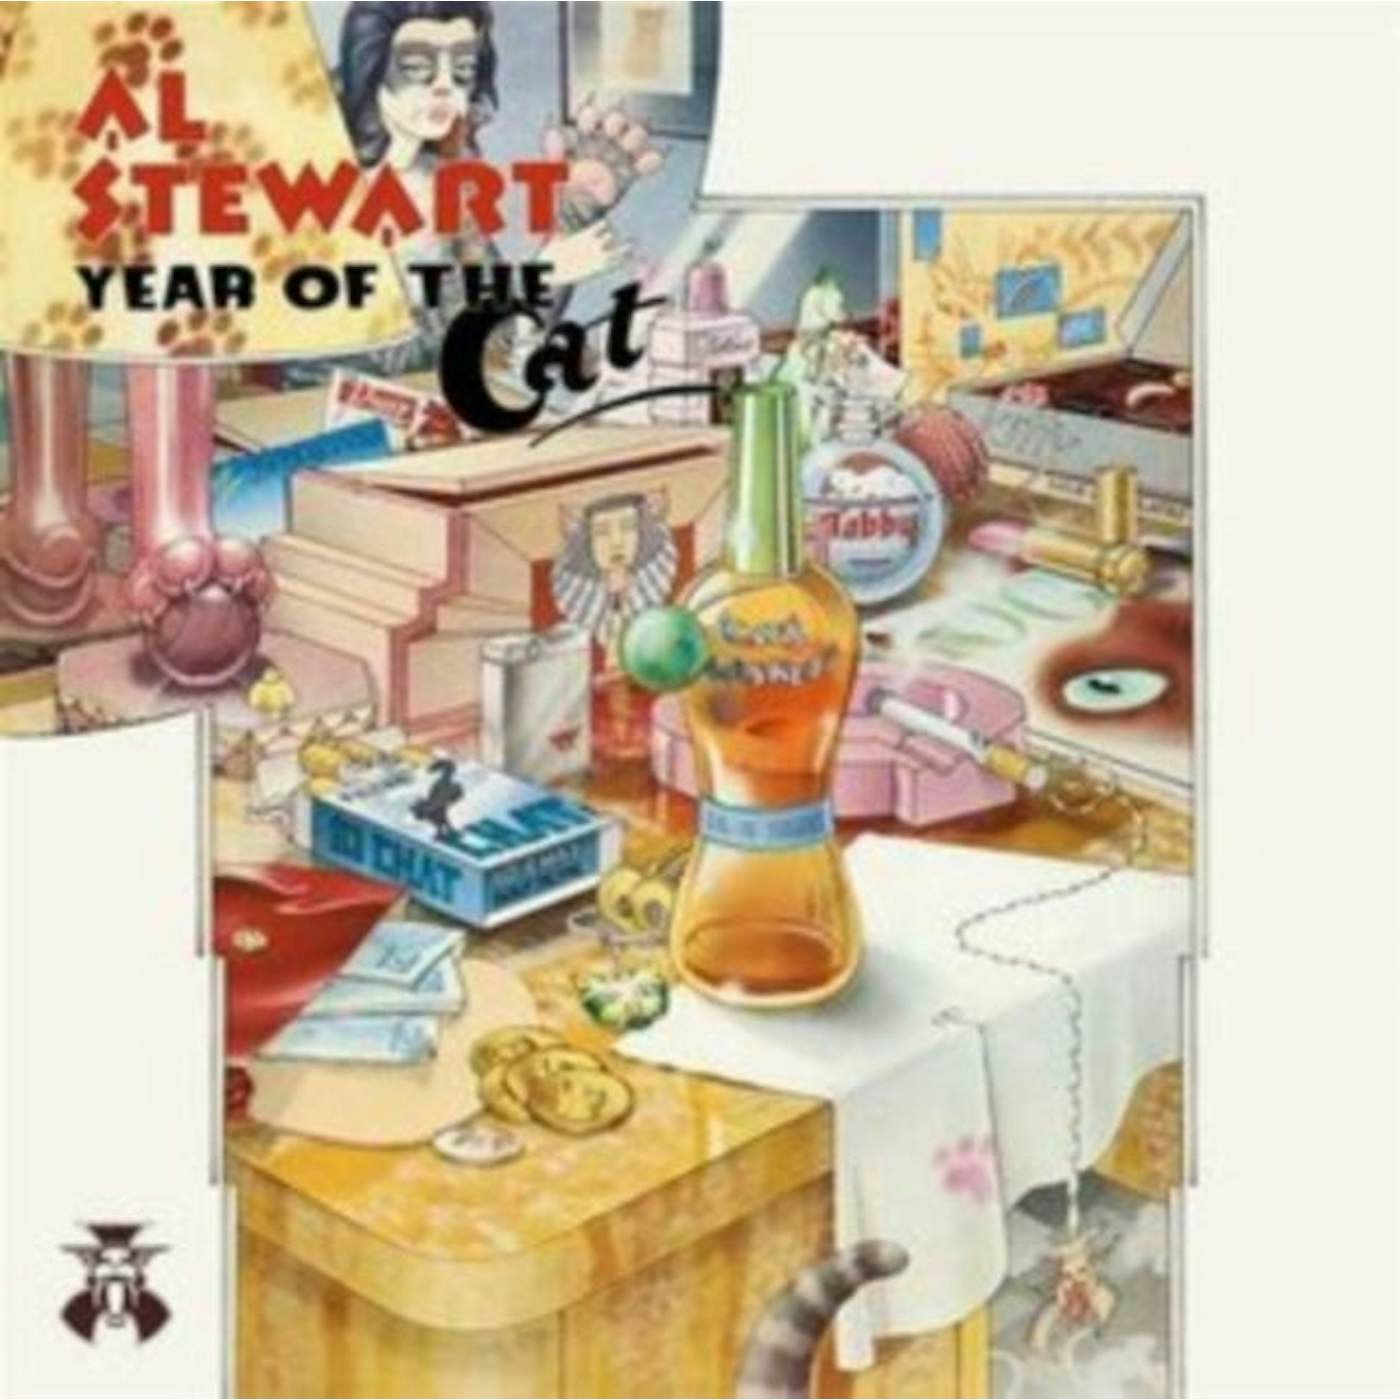 Al Stewart CD - Year Of The Cat (Remastered/Expanded Edition)